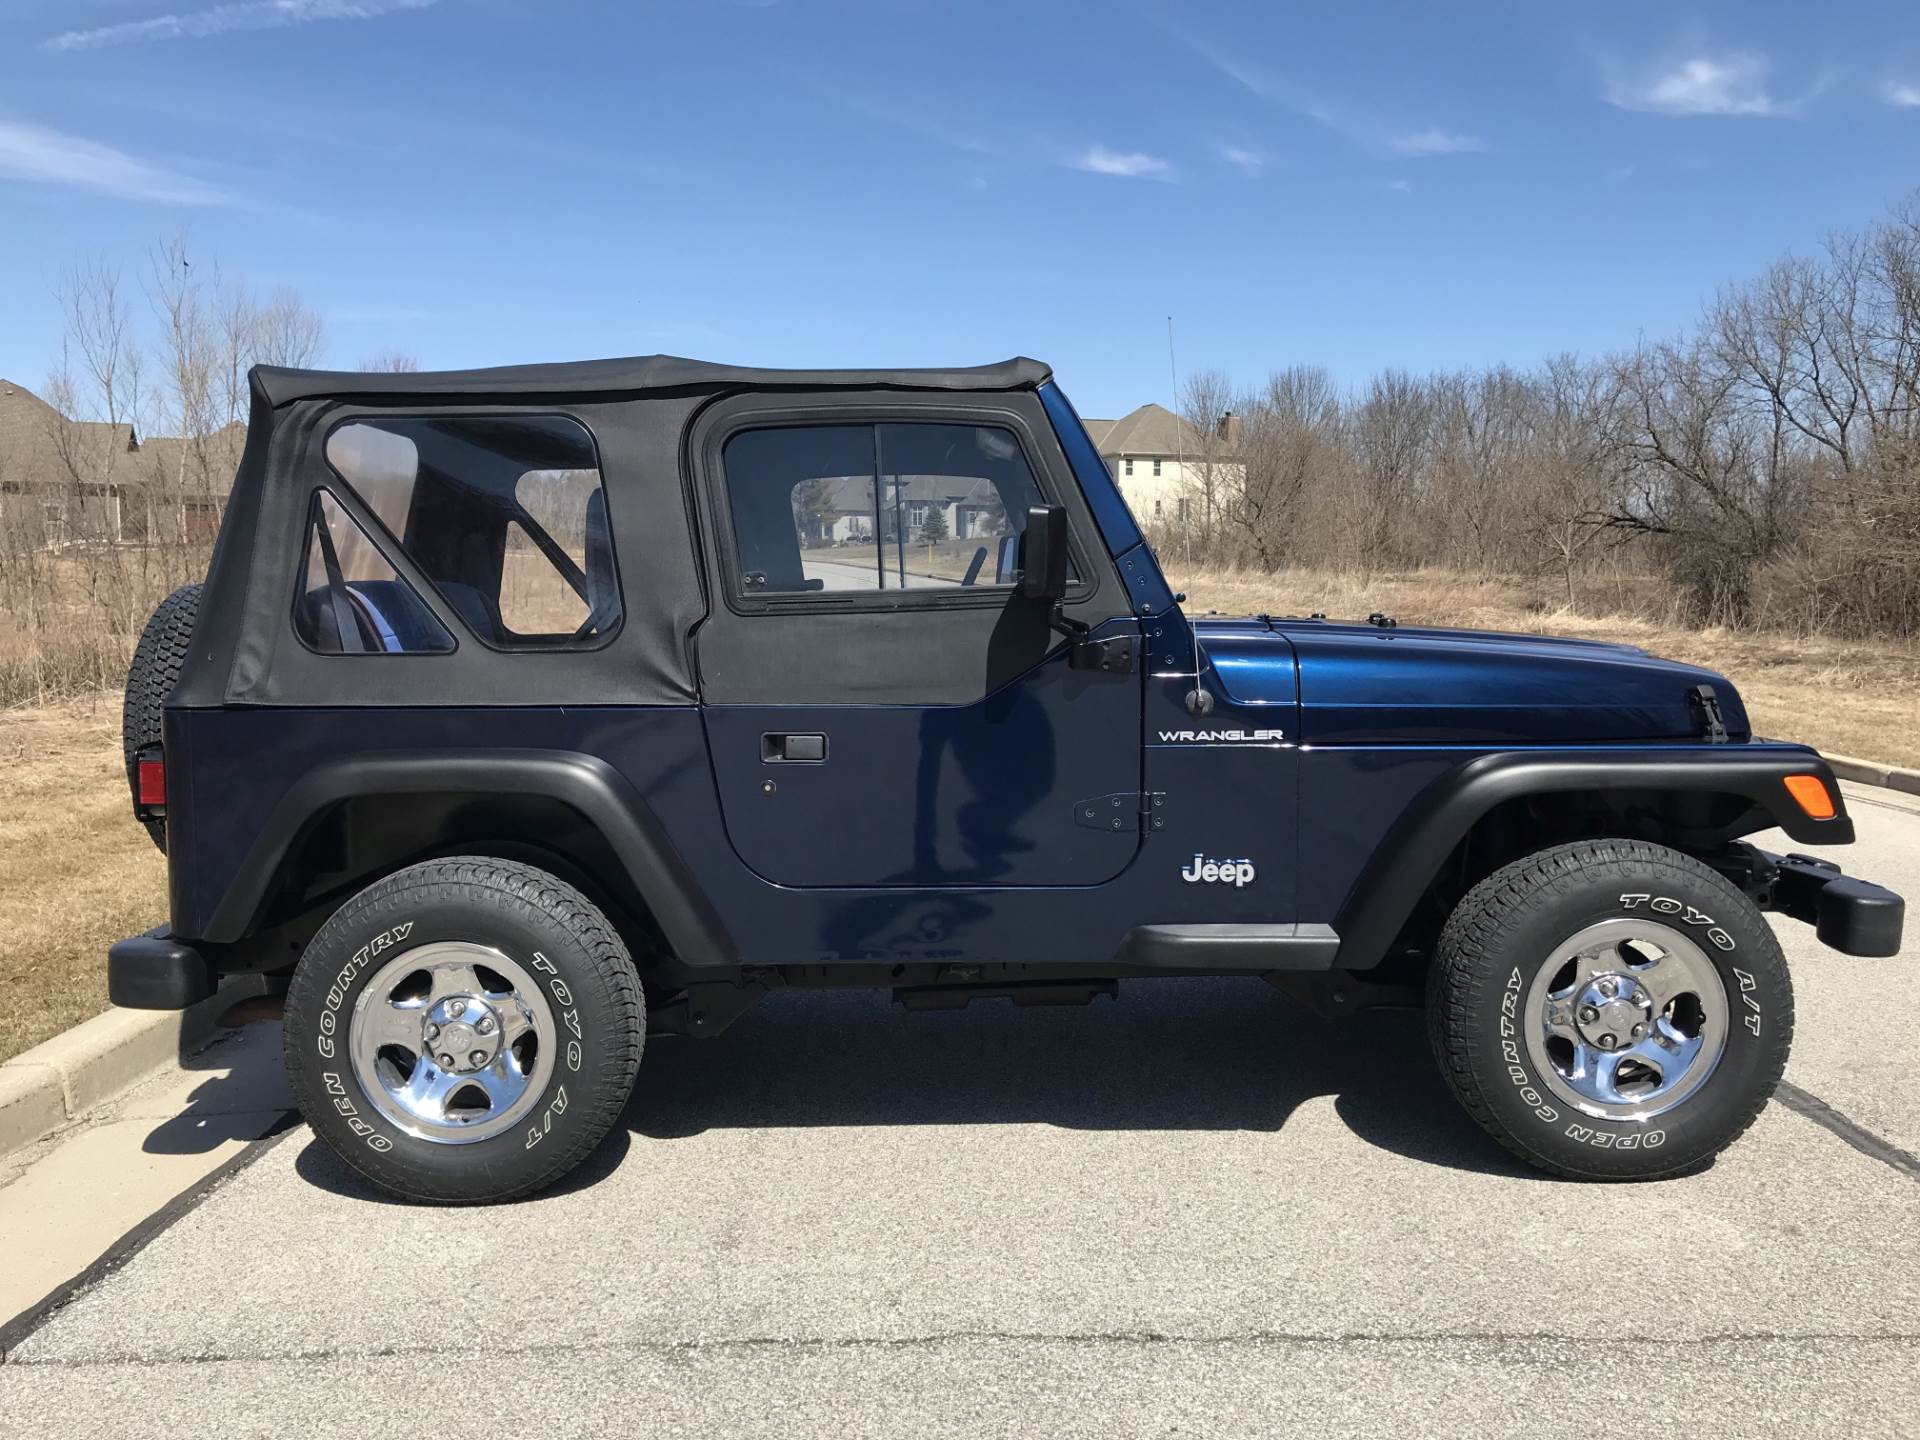 Used 2002 Jeep® Wrangler X | Automobile in Big Bend WI | 4004 Patriot Blue